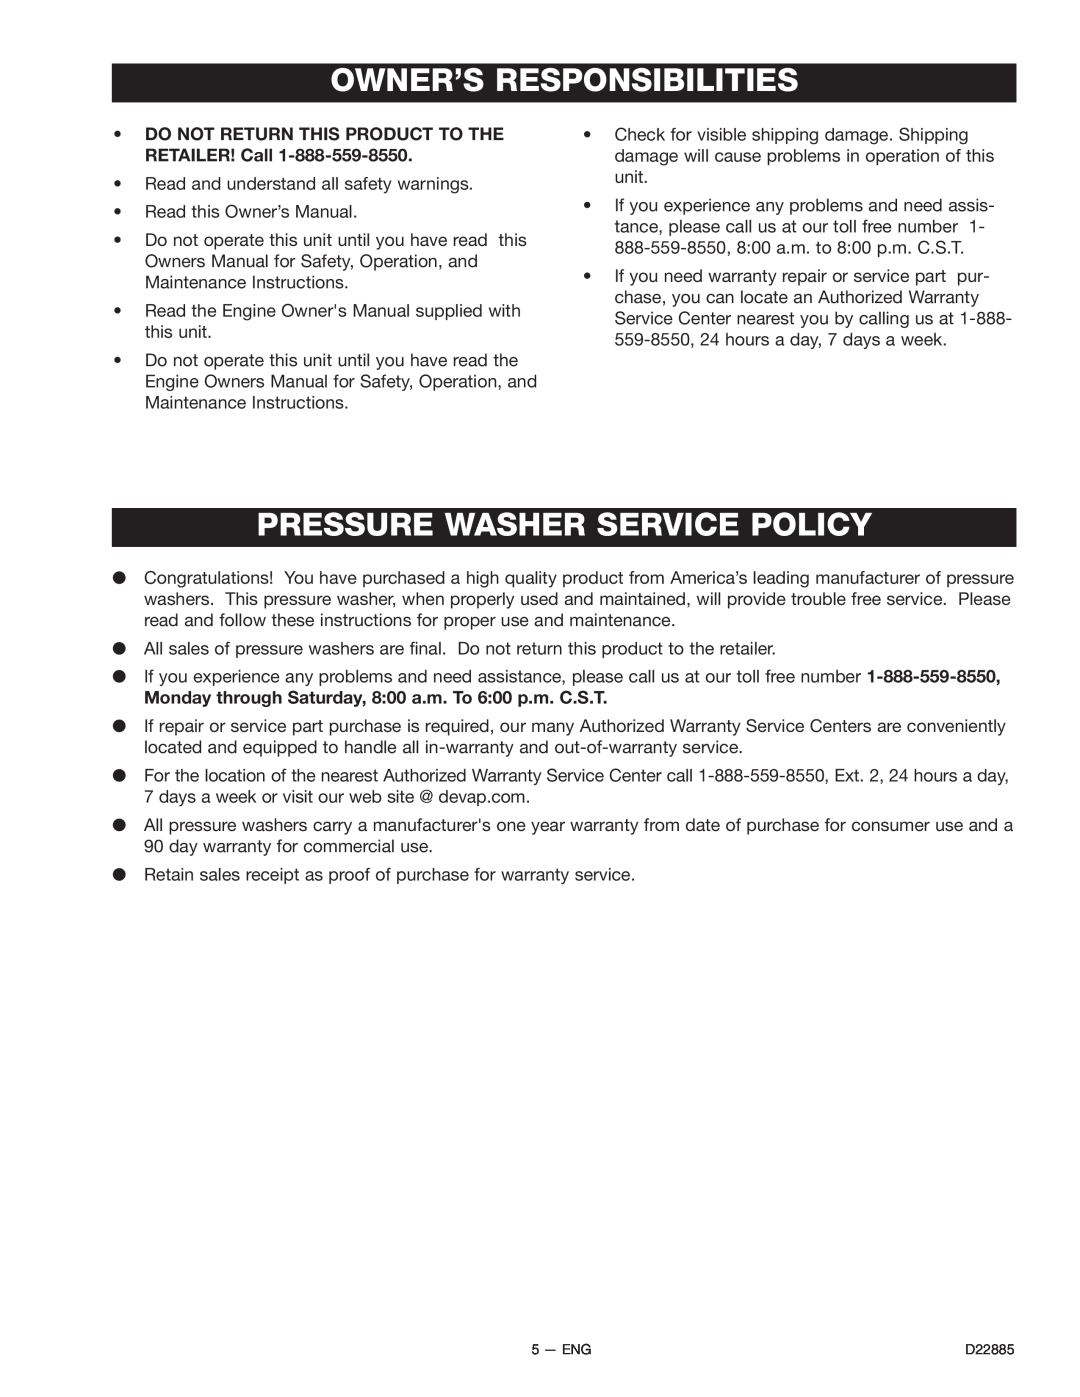 Porter-Cable PCH2627, PCV2021, PCH2425, PCH3030, PCH3540HR Owner’S Responsibilities, Pressure Washer Service Policy 